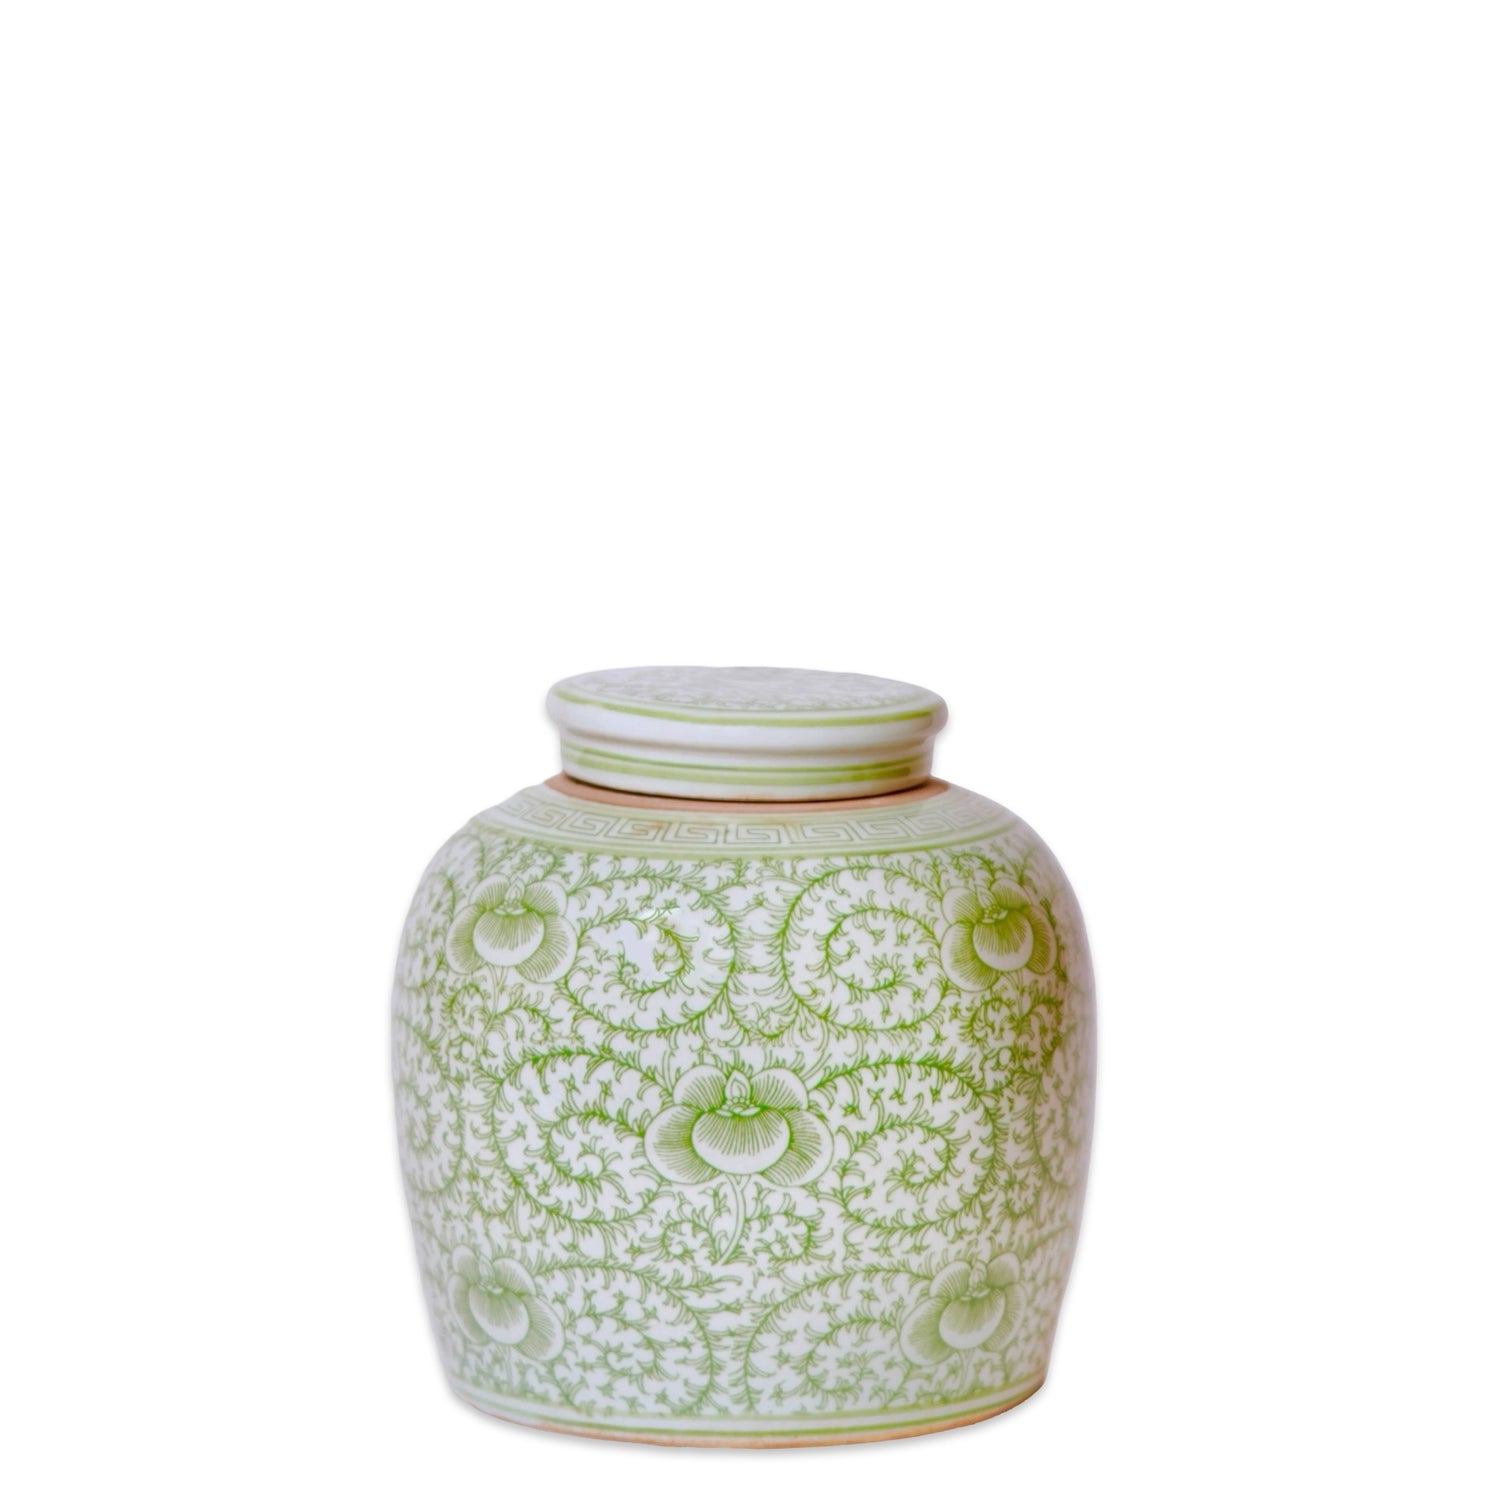 Scrolling Peony Green and White Porcelain Jar